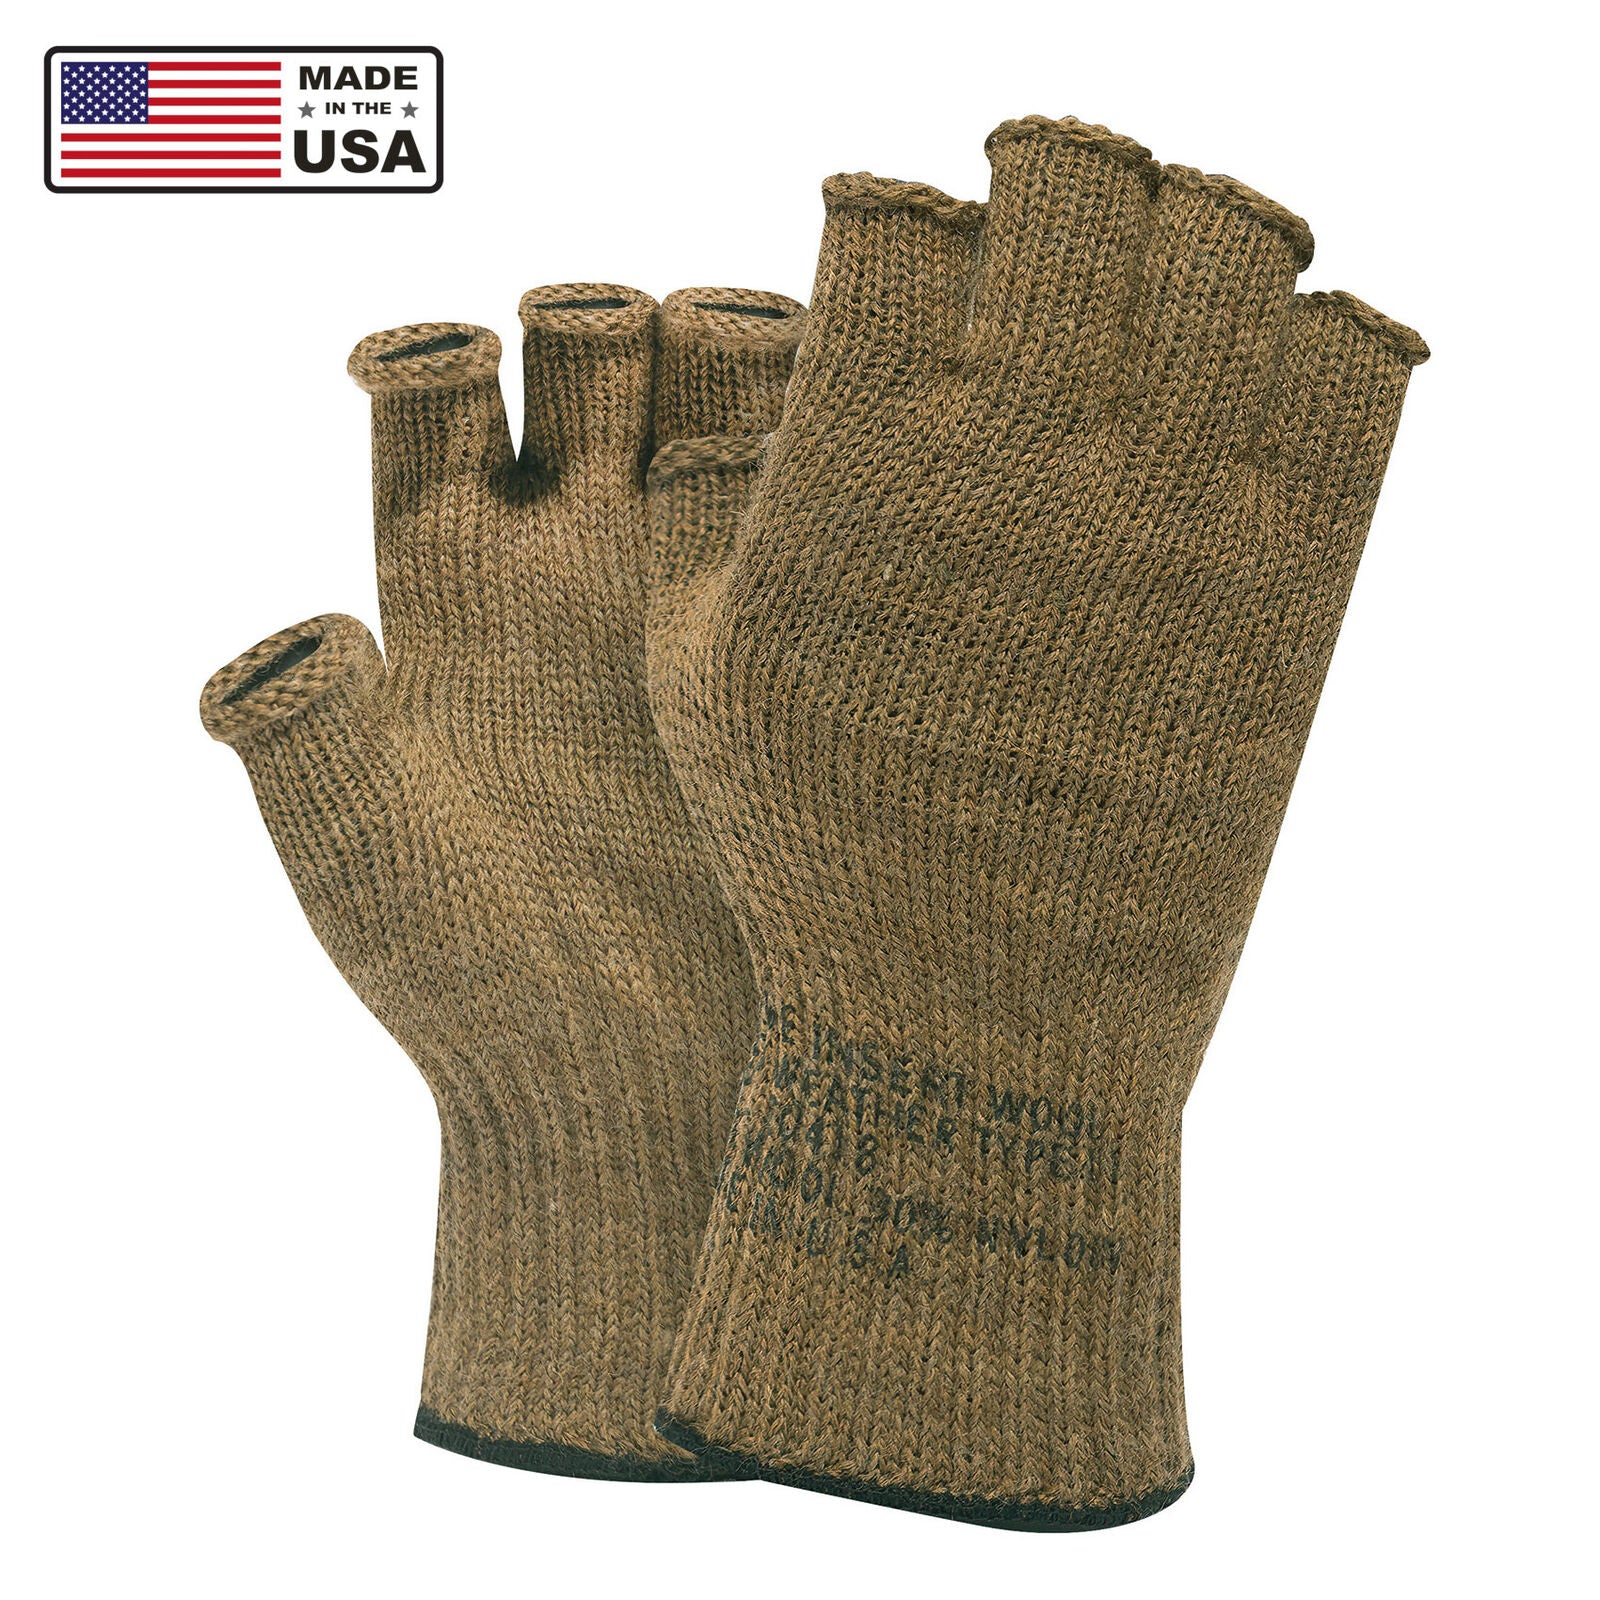 Rothco Fingerless Wool Gloves, Coyote Brown